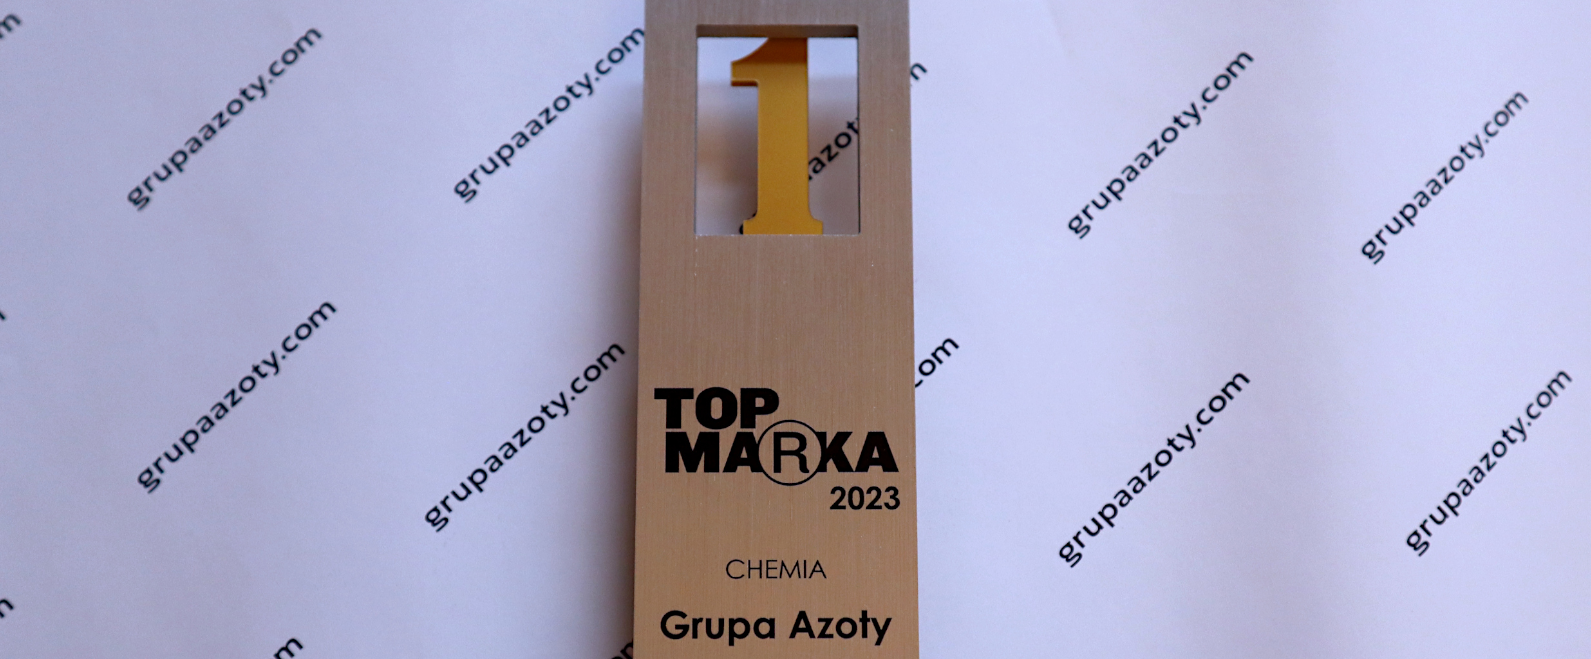 Top Brand 2023 – Grupa Azoty secures top spot as the strongest chemical brand 